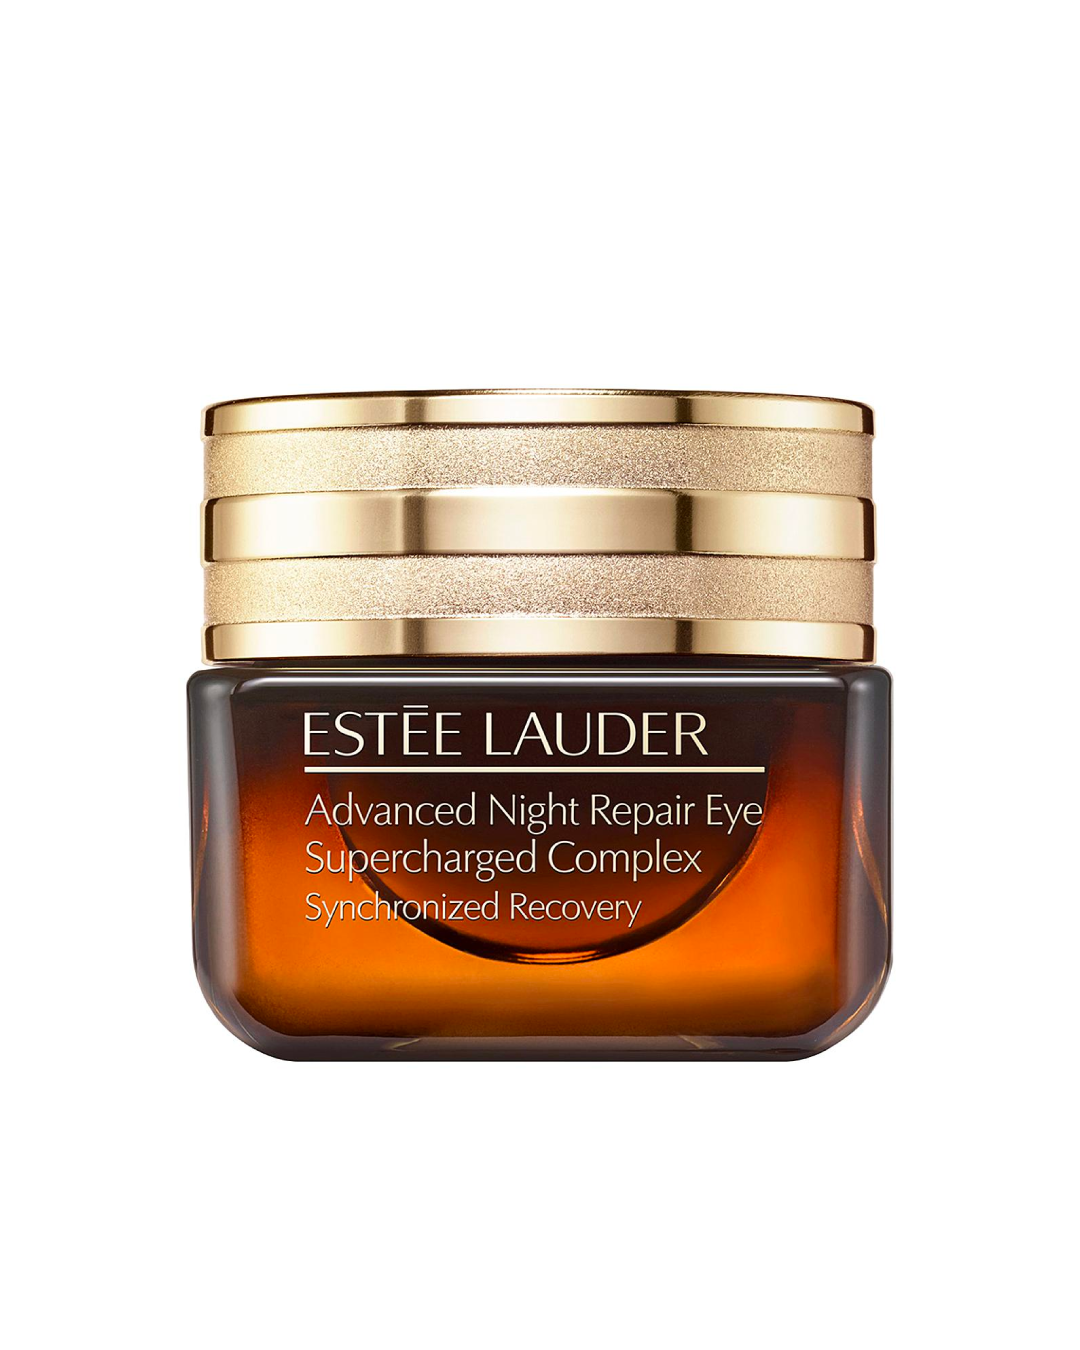 Estee Lauder Advanced Night Repair Eye Supercharged Complex Synchronized Recovery (15ml) - Best Buy World Philippines